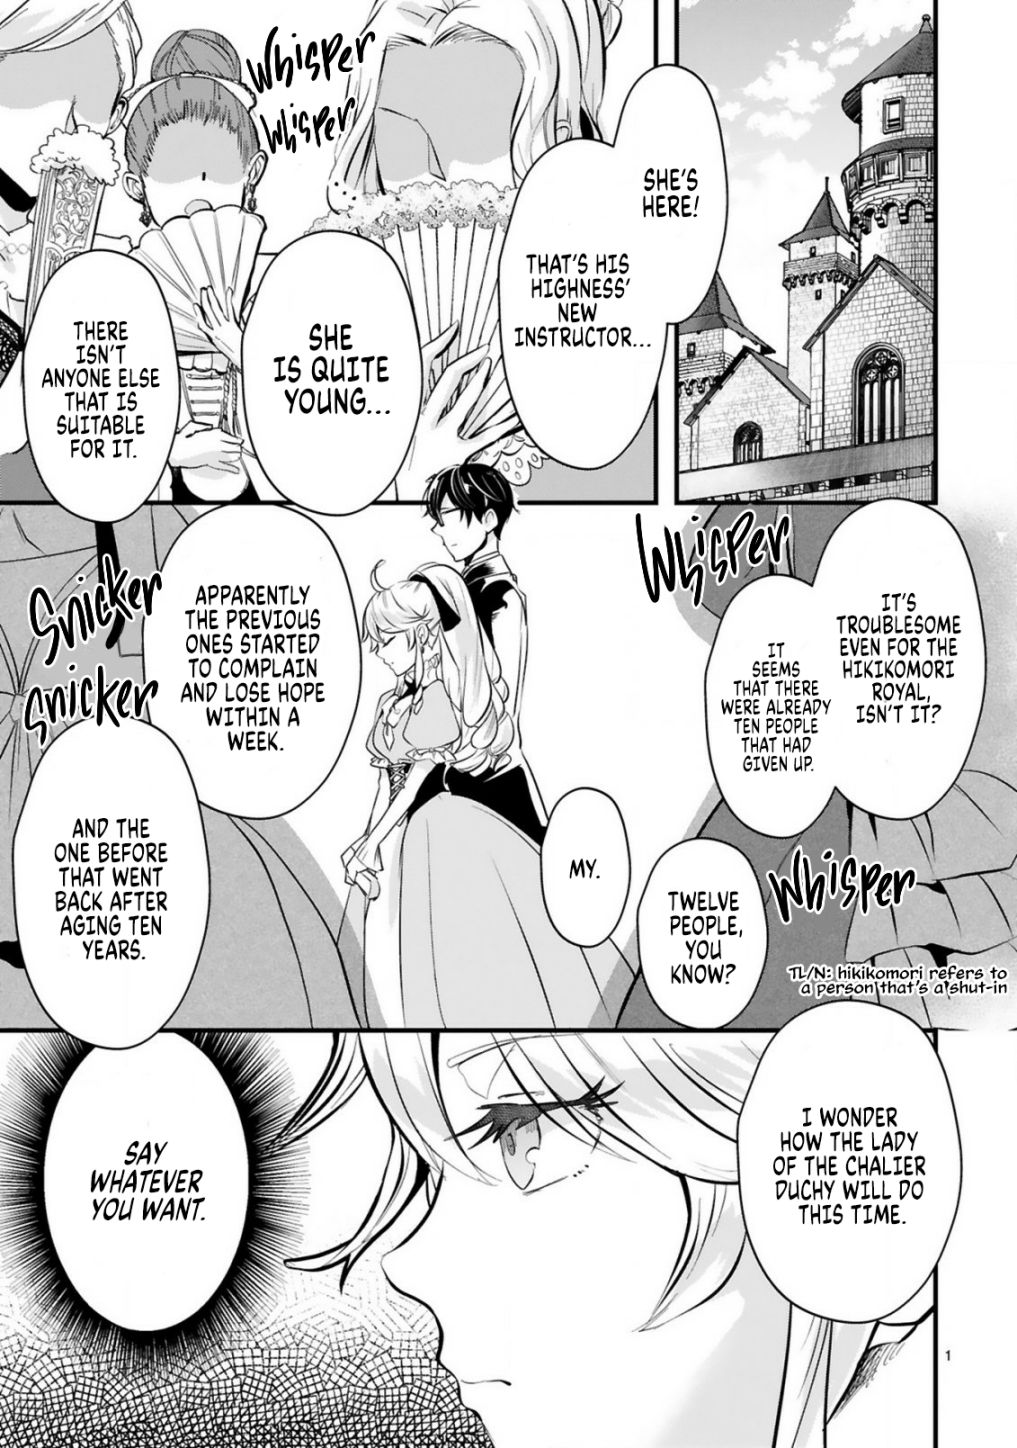 The Duke’s Daughter Who Was a Villain in Her Previous Lives Was Entrusted with Training a Hikikomori Prince - chapter 1 - #2